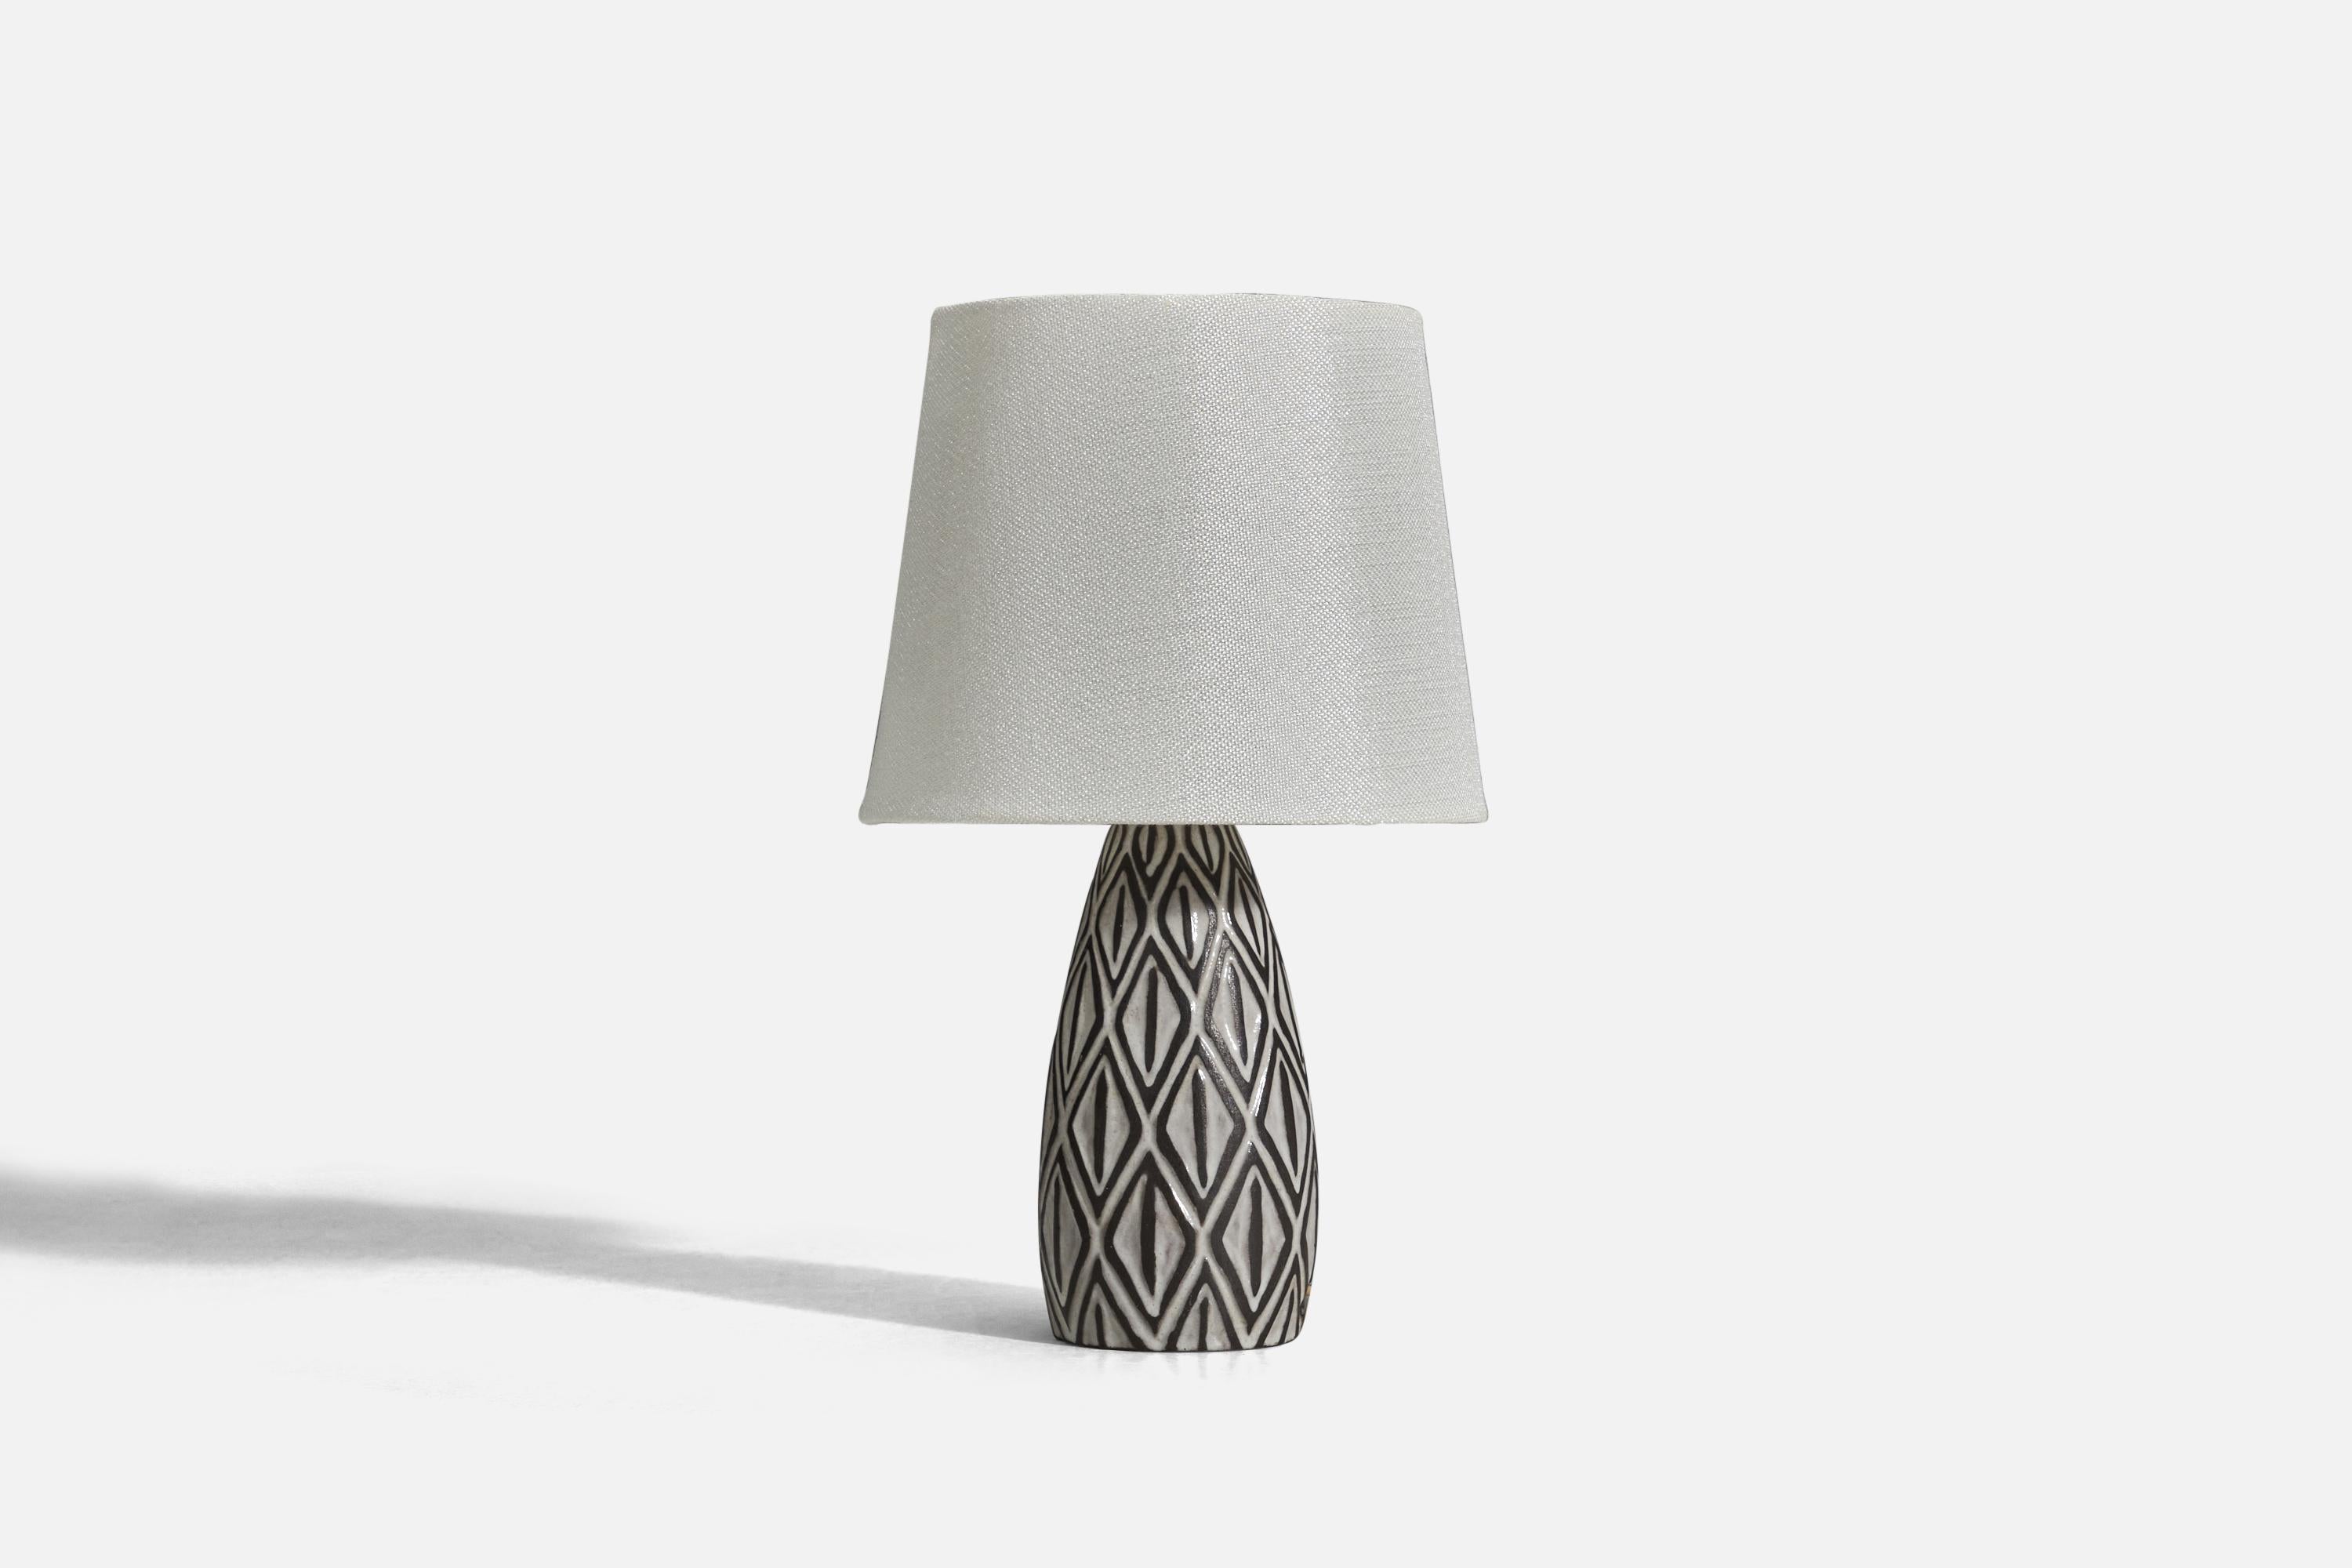 A white and brown glazed stoneware table lamp designed and produced in Denmark, 1960s.

Sold without lampshade
Dimensions of lamp (inches) : 8.81 x 3.10 x 3.10 (Height x Width x Depth)
Dimensions of lampshade (inches) : 5.5 x 7 x 5.75 (Top